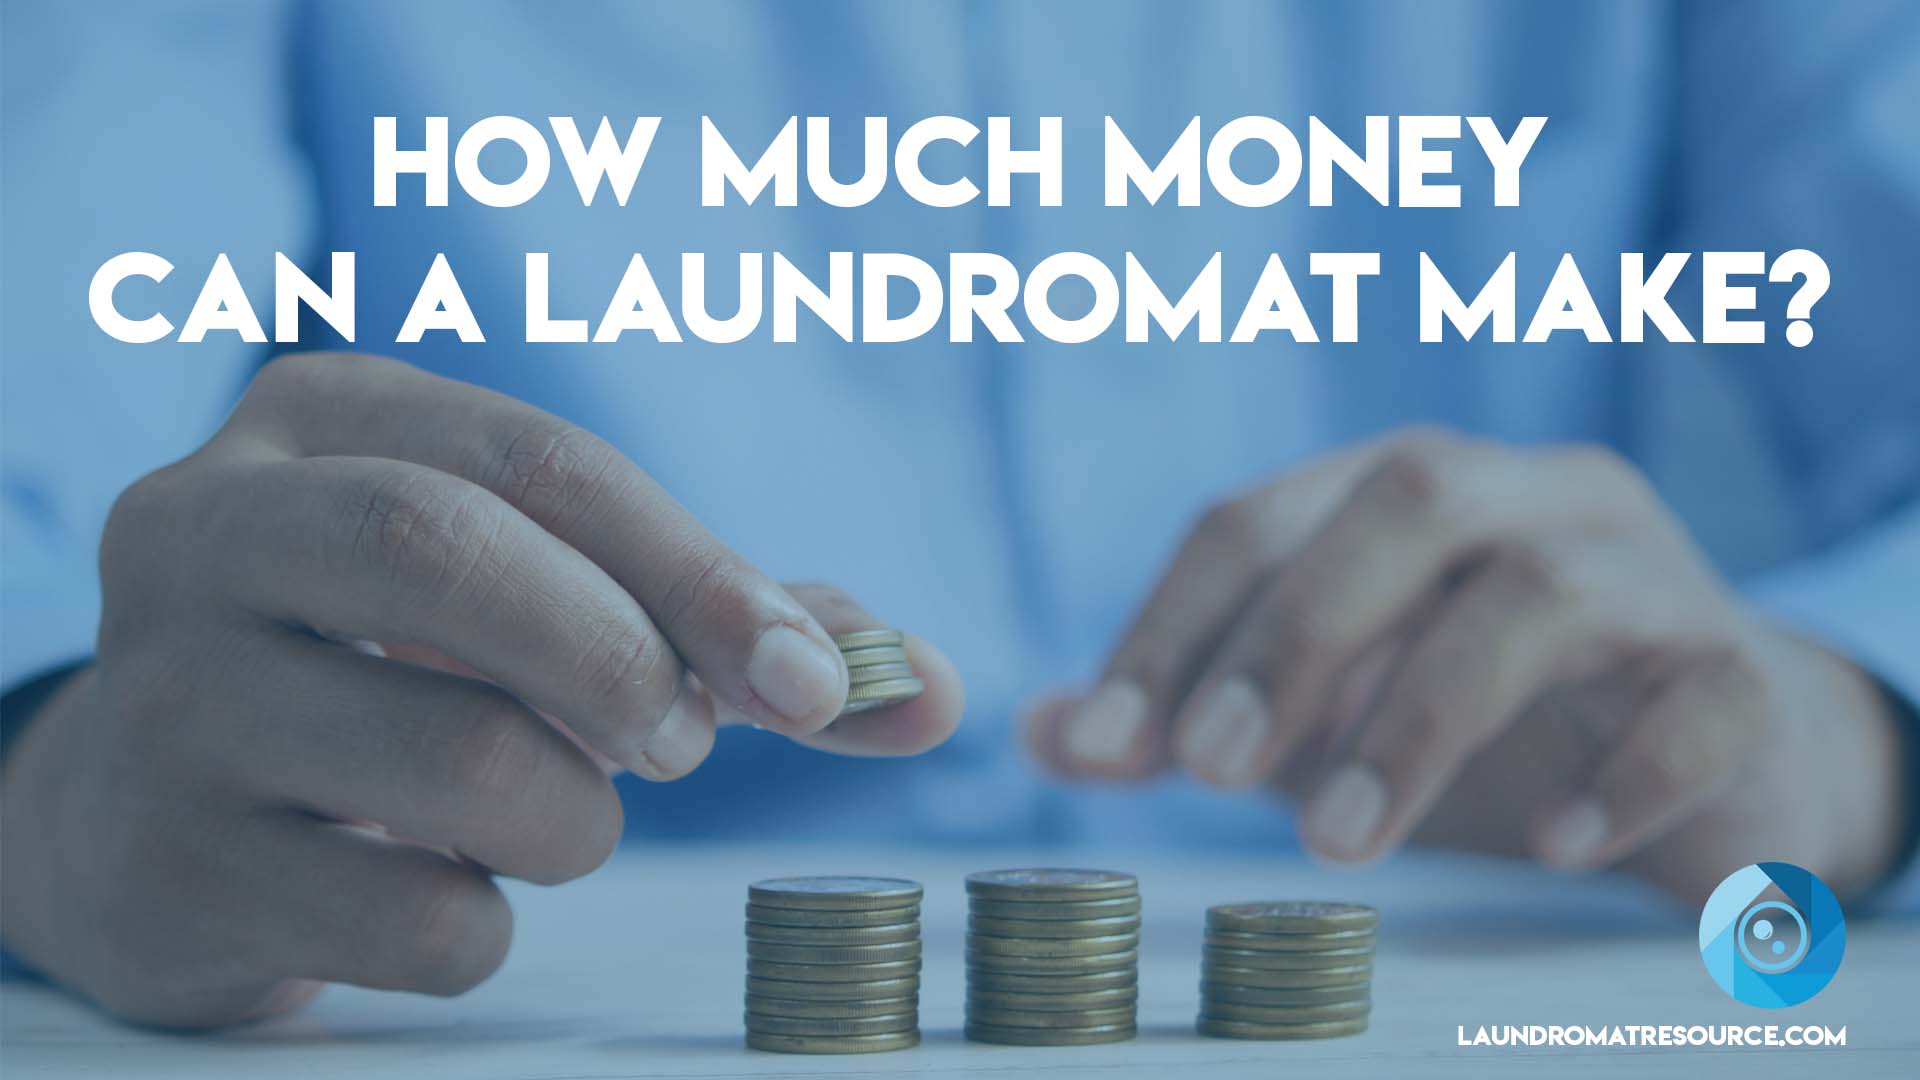 How Much Money Can a Laundromat Make?